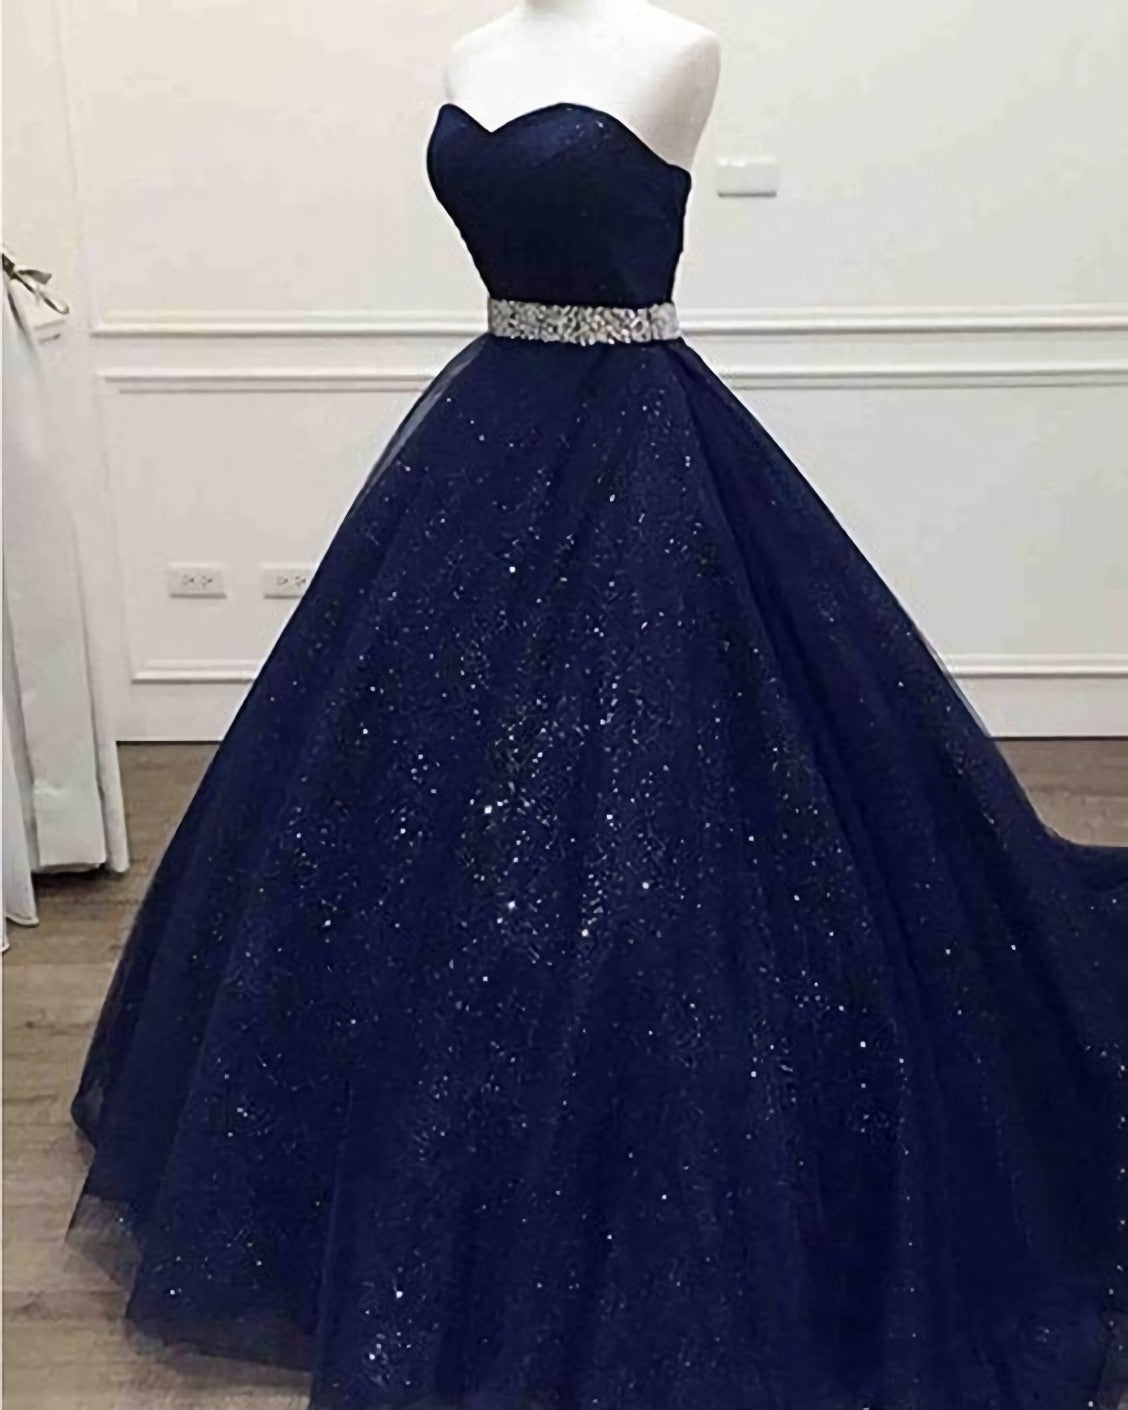 Prom Dresses Outfits Fall Casual, Ong Navy Blue Sparkle Sweetheart Tulle Prom Dress, With Beading Belt